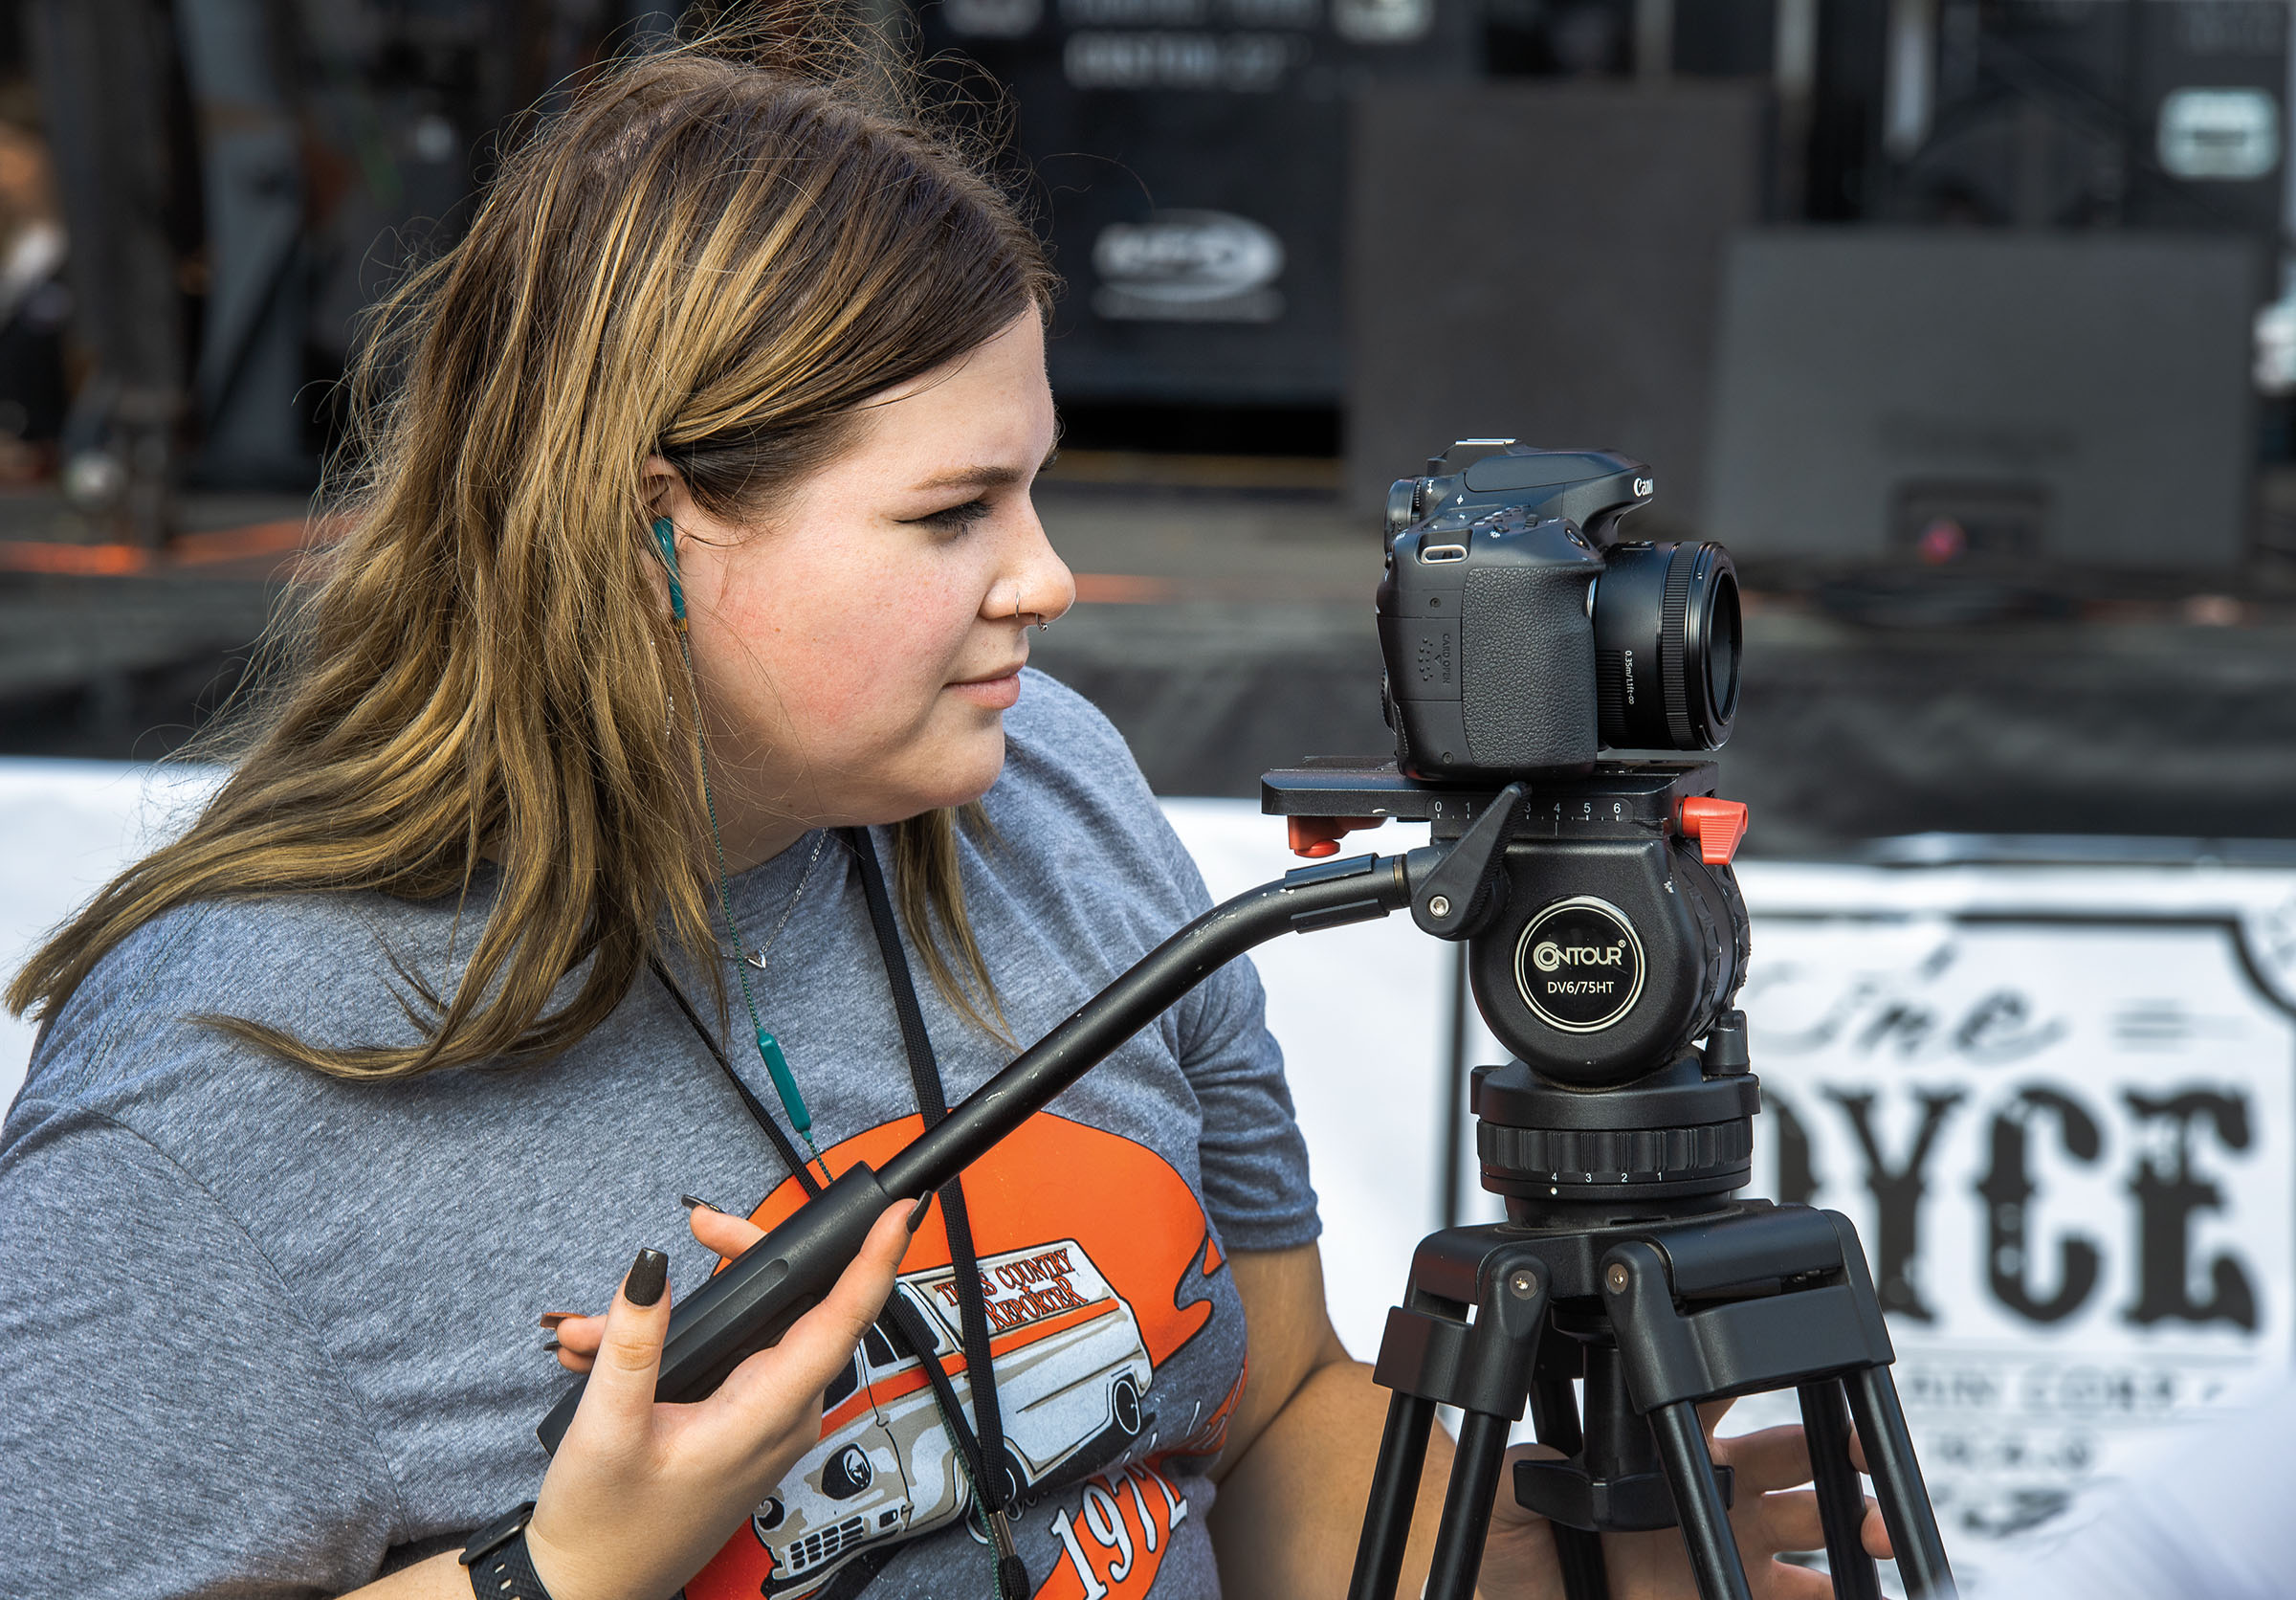 A woman holds a tripod with a camera attached